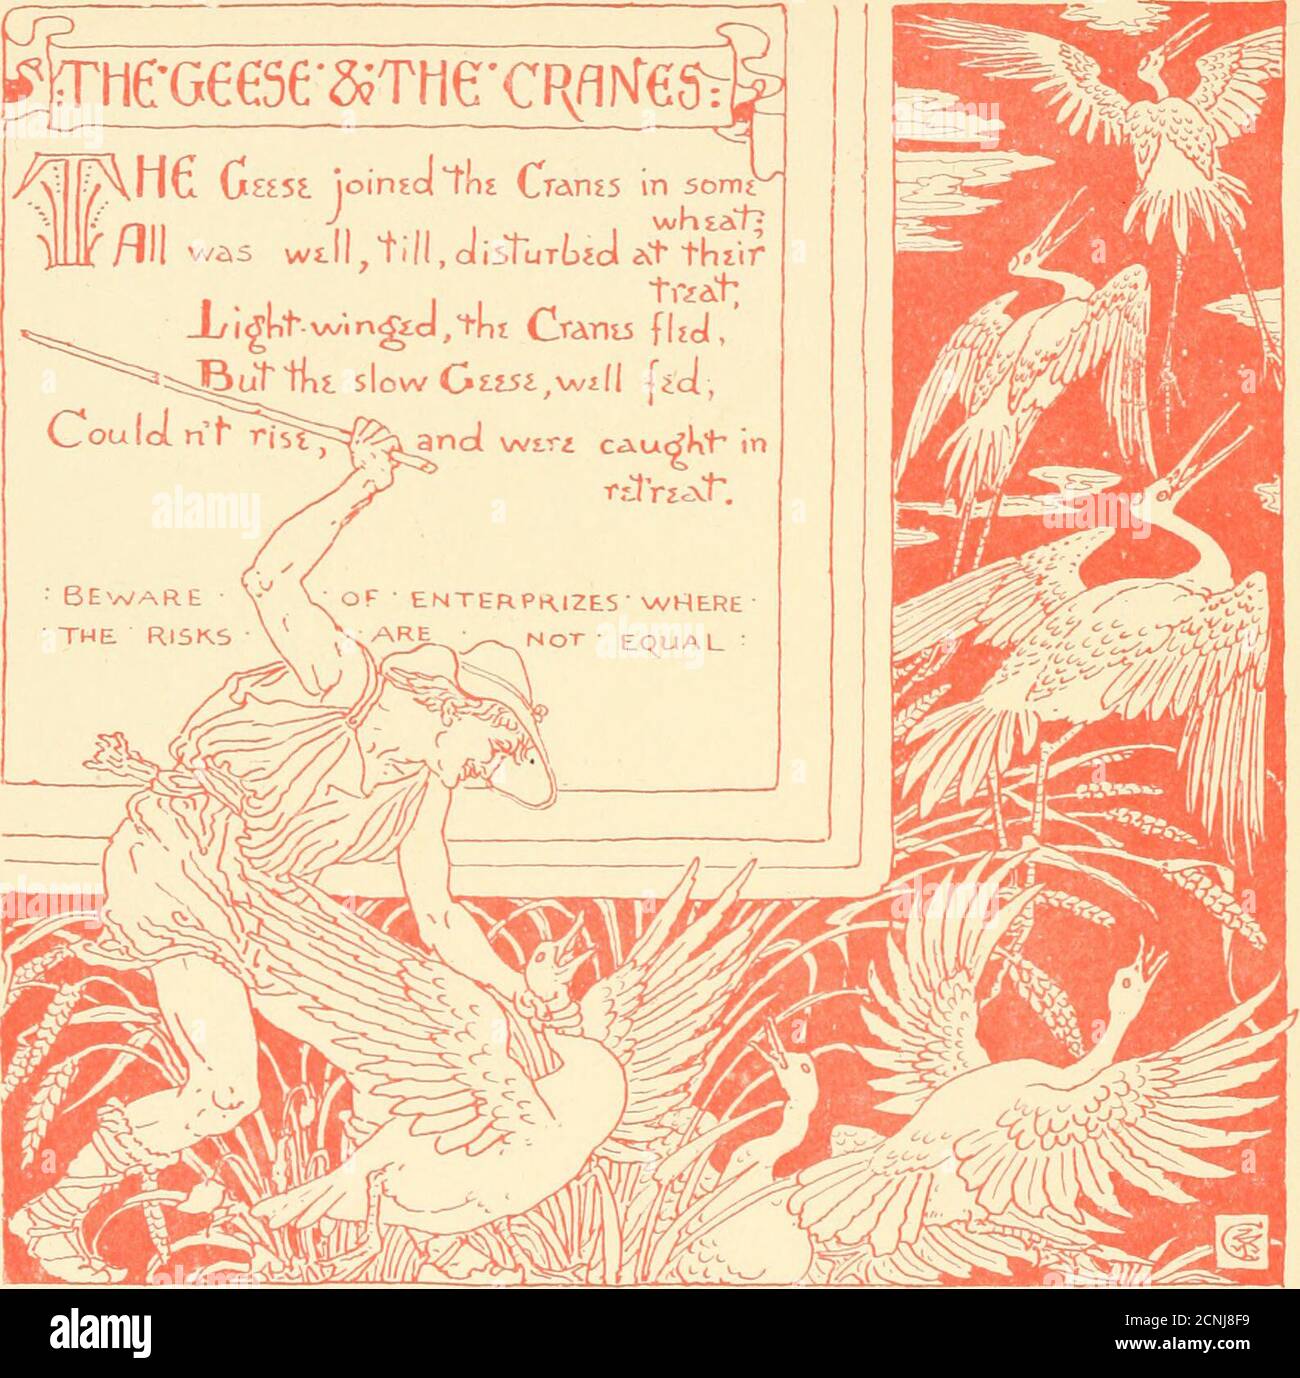 . The baby's own Aesop : being the fables condensed in rhyme with portable morals pictorially pointed by Walter Crane. Engraved and printed in colours by Edmund Evans . HeG€e5€2iTHeCRfli^re^i /v /H.nt GaSL joined 1ni Ctatms in some/ill v^as wtll^till.olisTuTijiol At thiif i^jrihi slow OilSi^wid |ici,Oouloi n ^ rTv?. Stock Photo